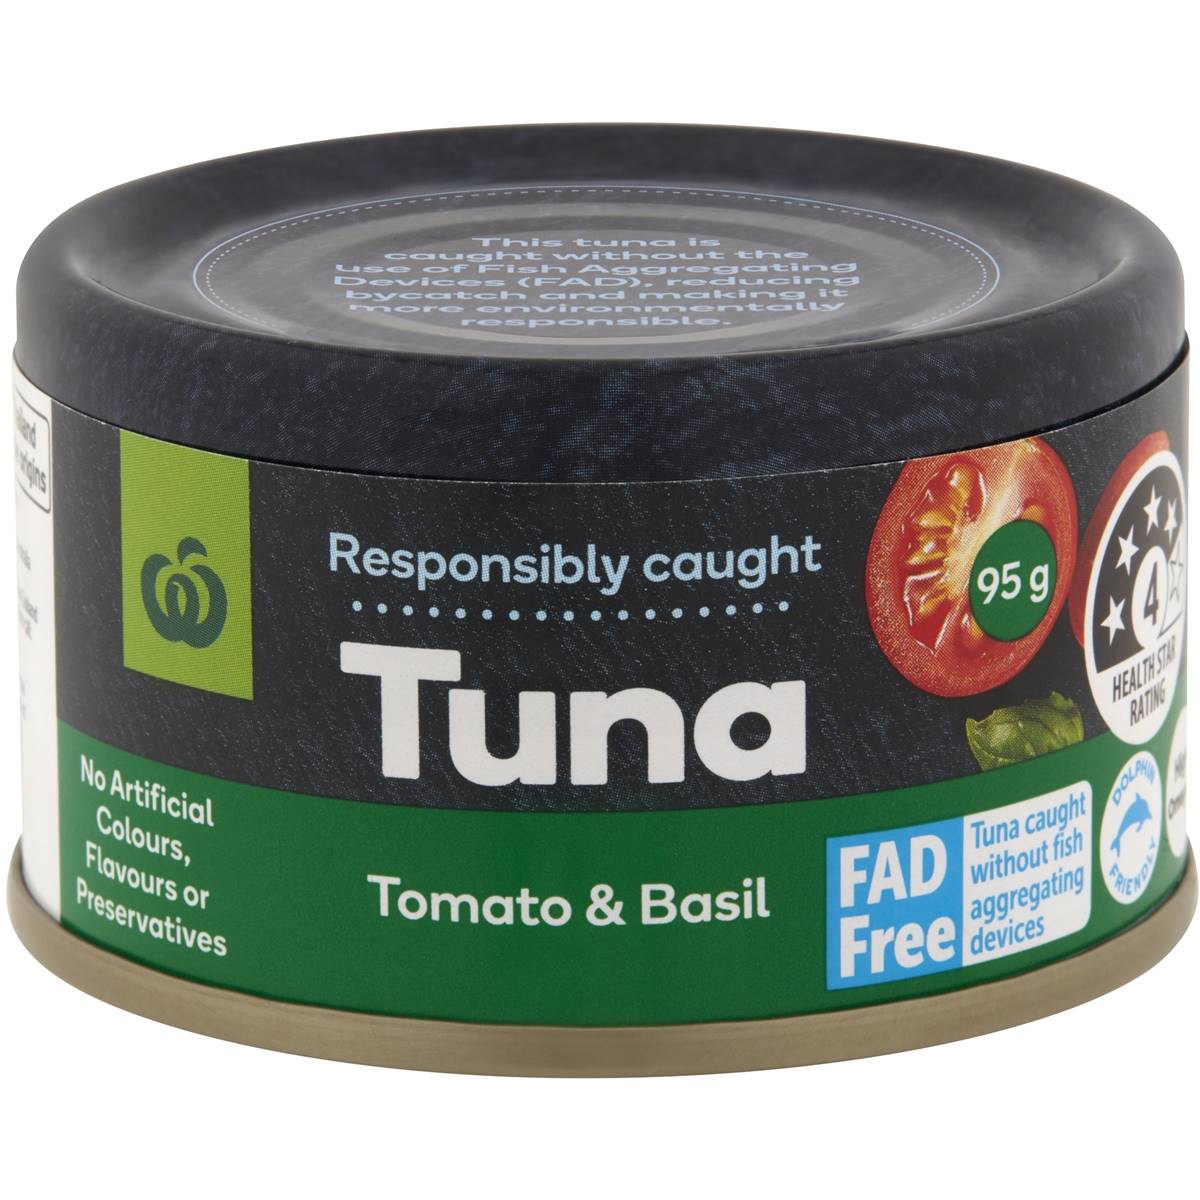 Calories in Woolworths Tuna Tomato & Basil